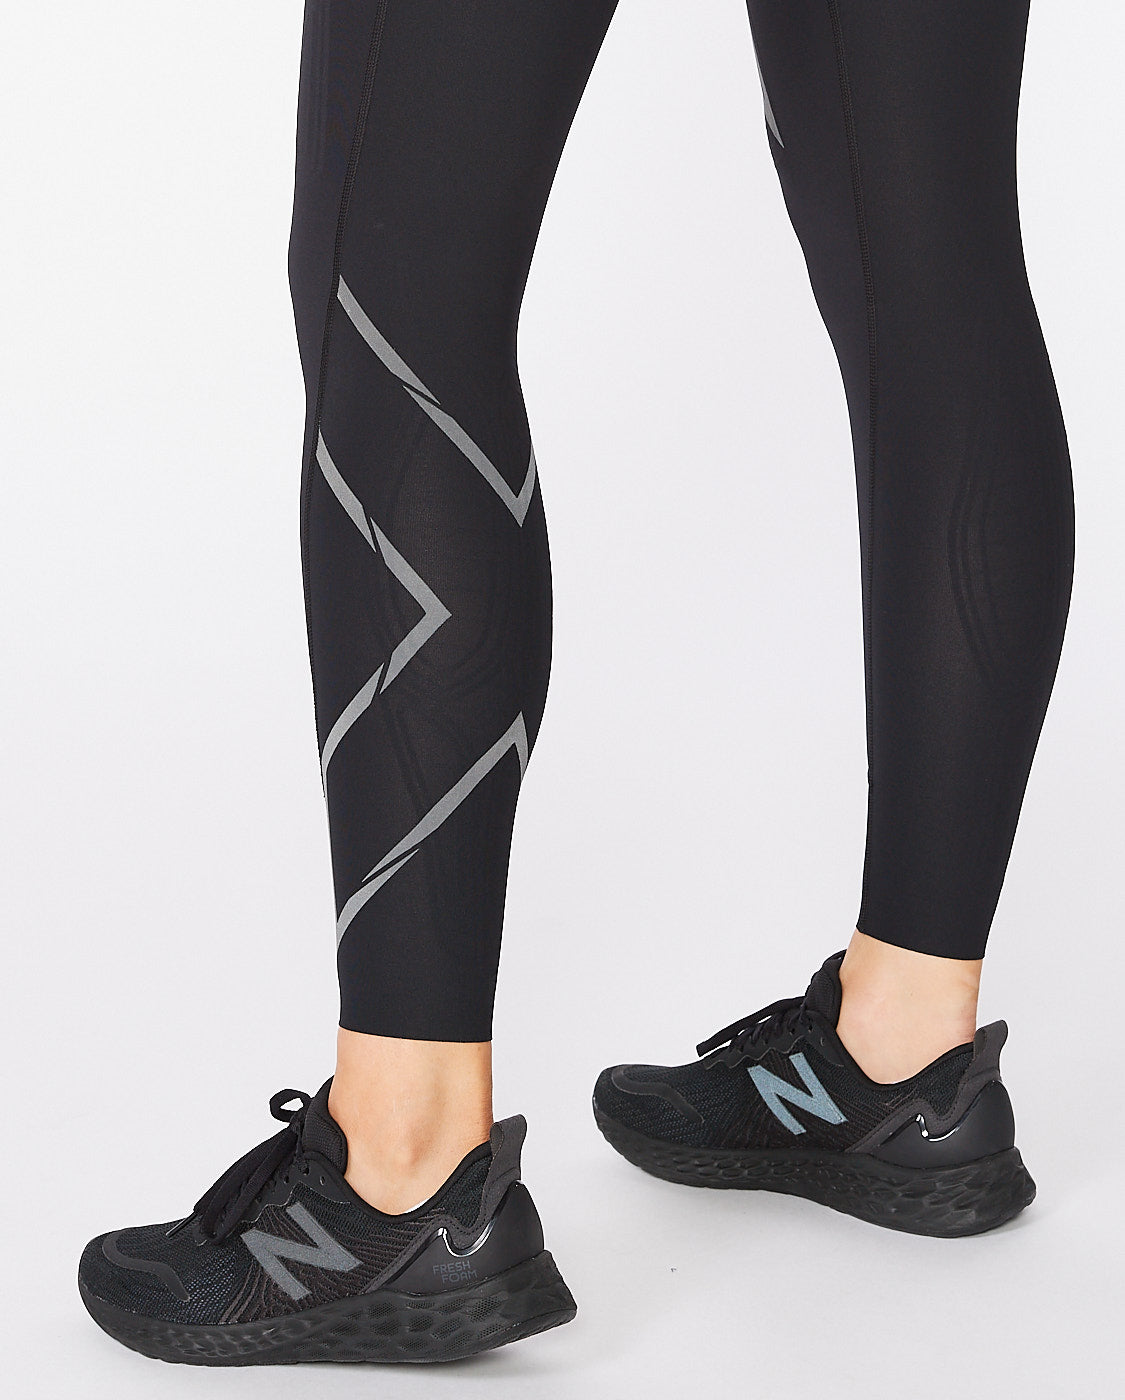 Buy 2XU Light Speed Mid Rise Compression Tights Womens Online